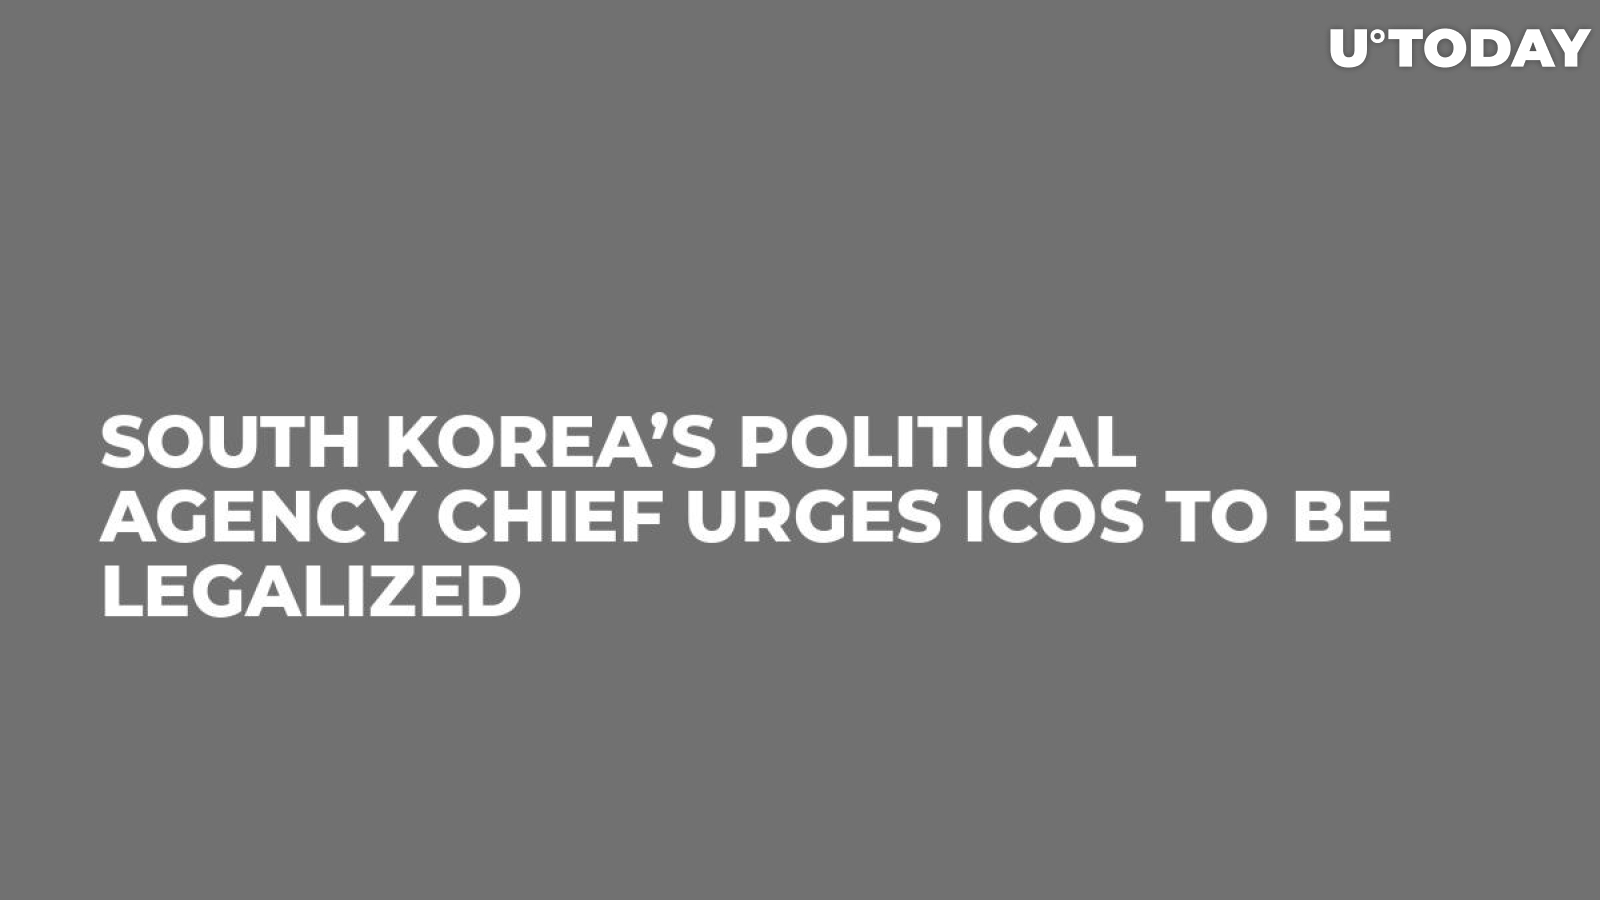 South Korea’s Political Agency Chief Urges ICOs to Be Legalized